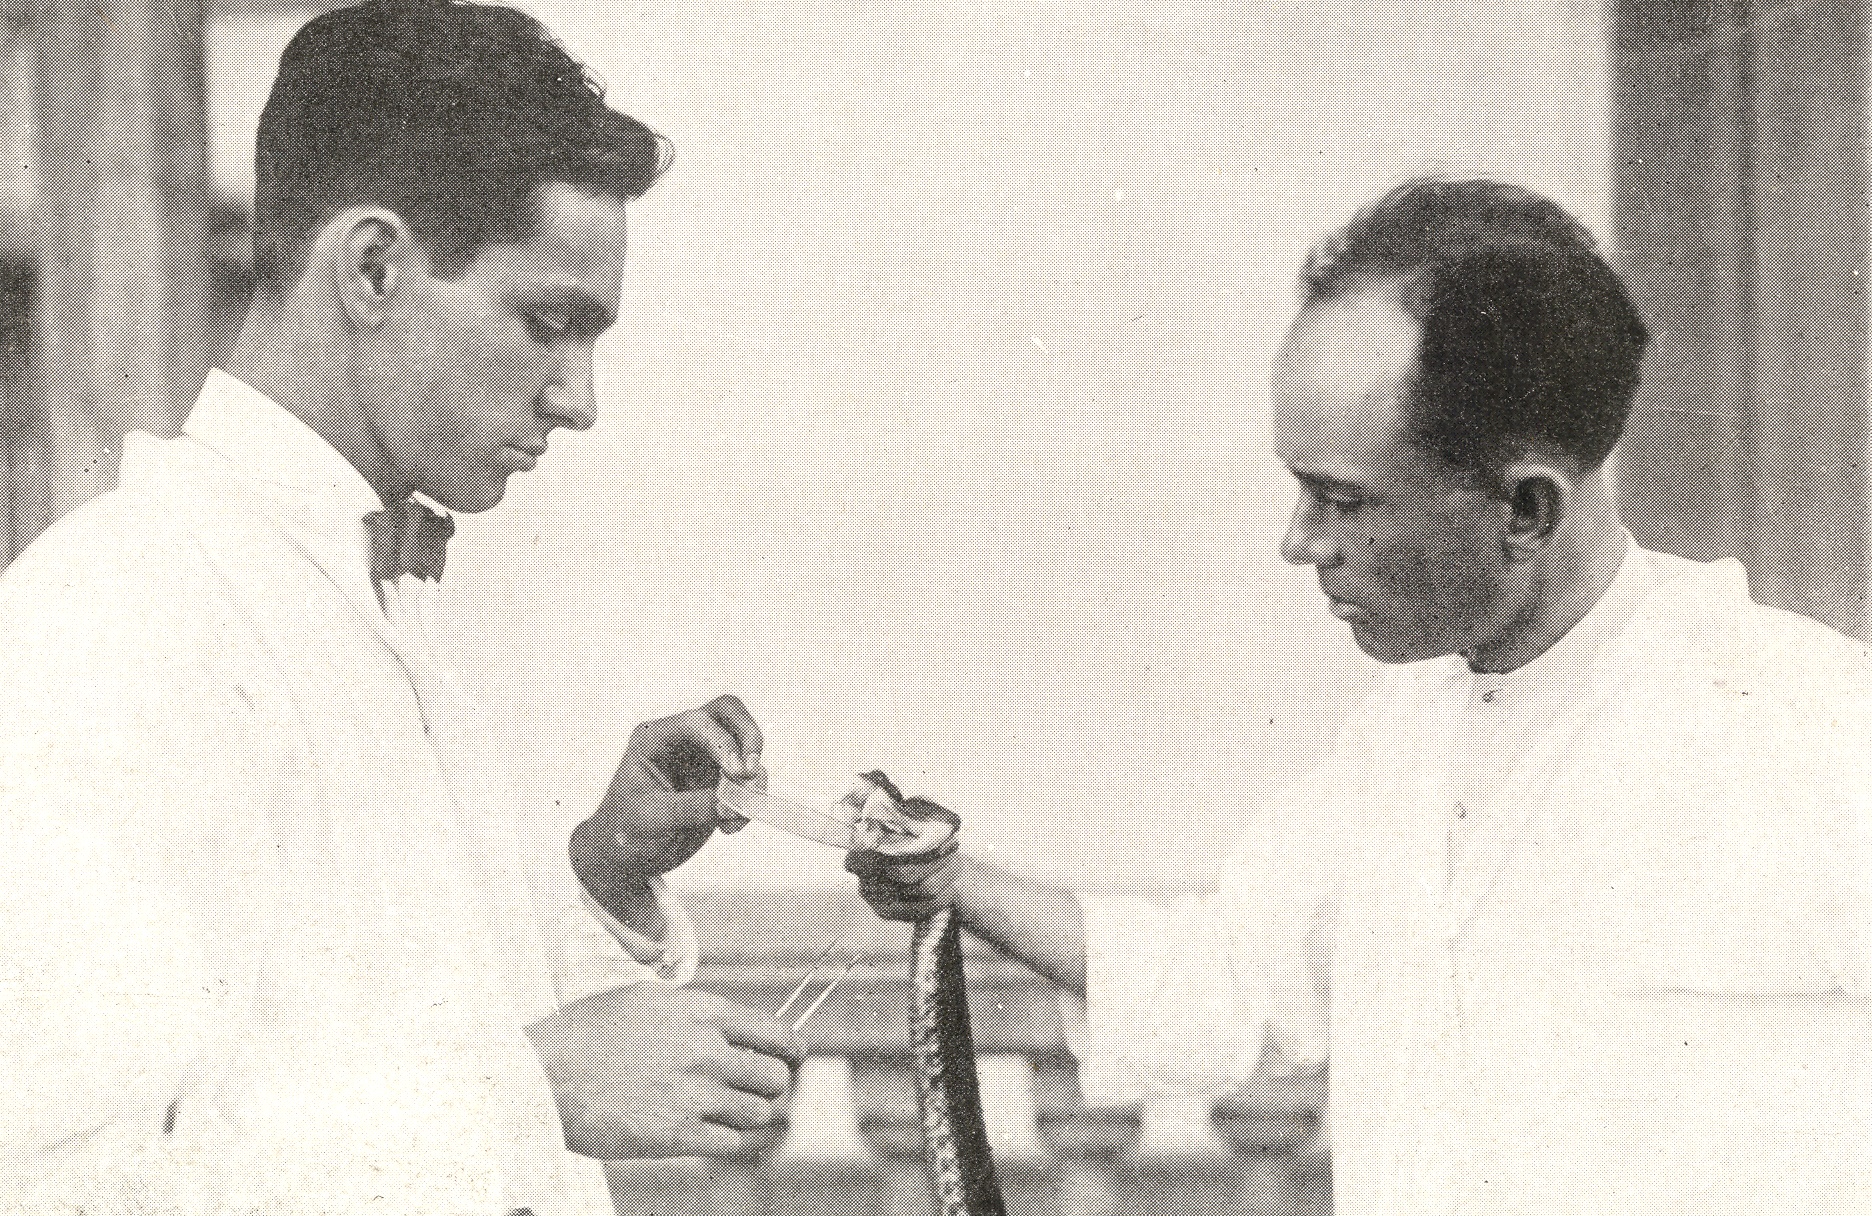 On the right, Dr. Clodomiro Picado and on the left, Mr. Luis Bolaños.